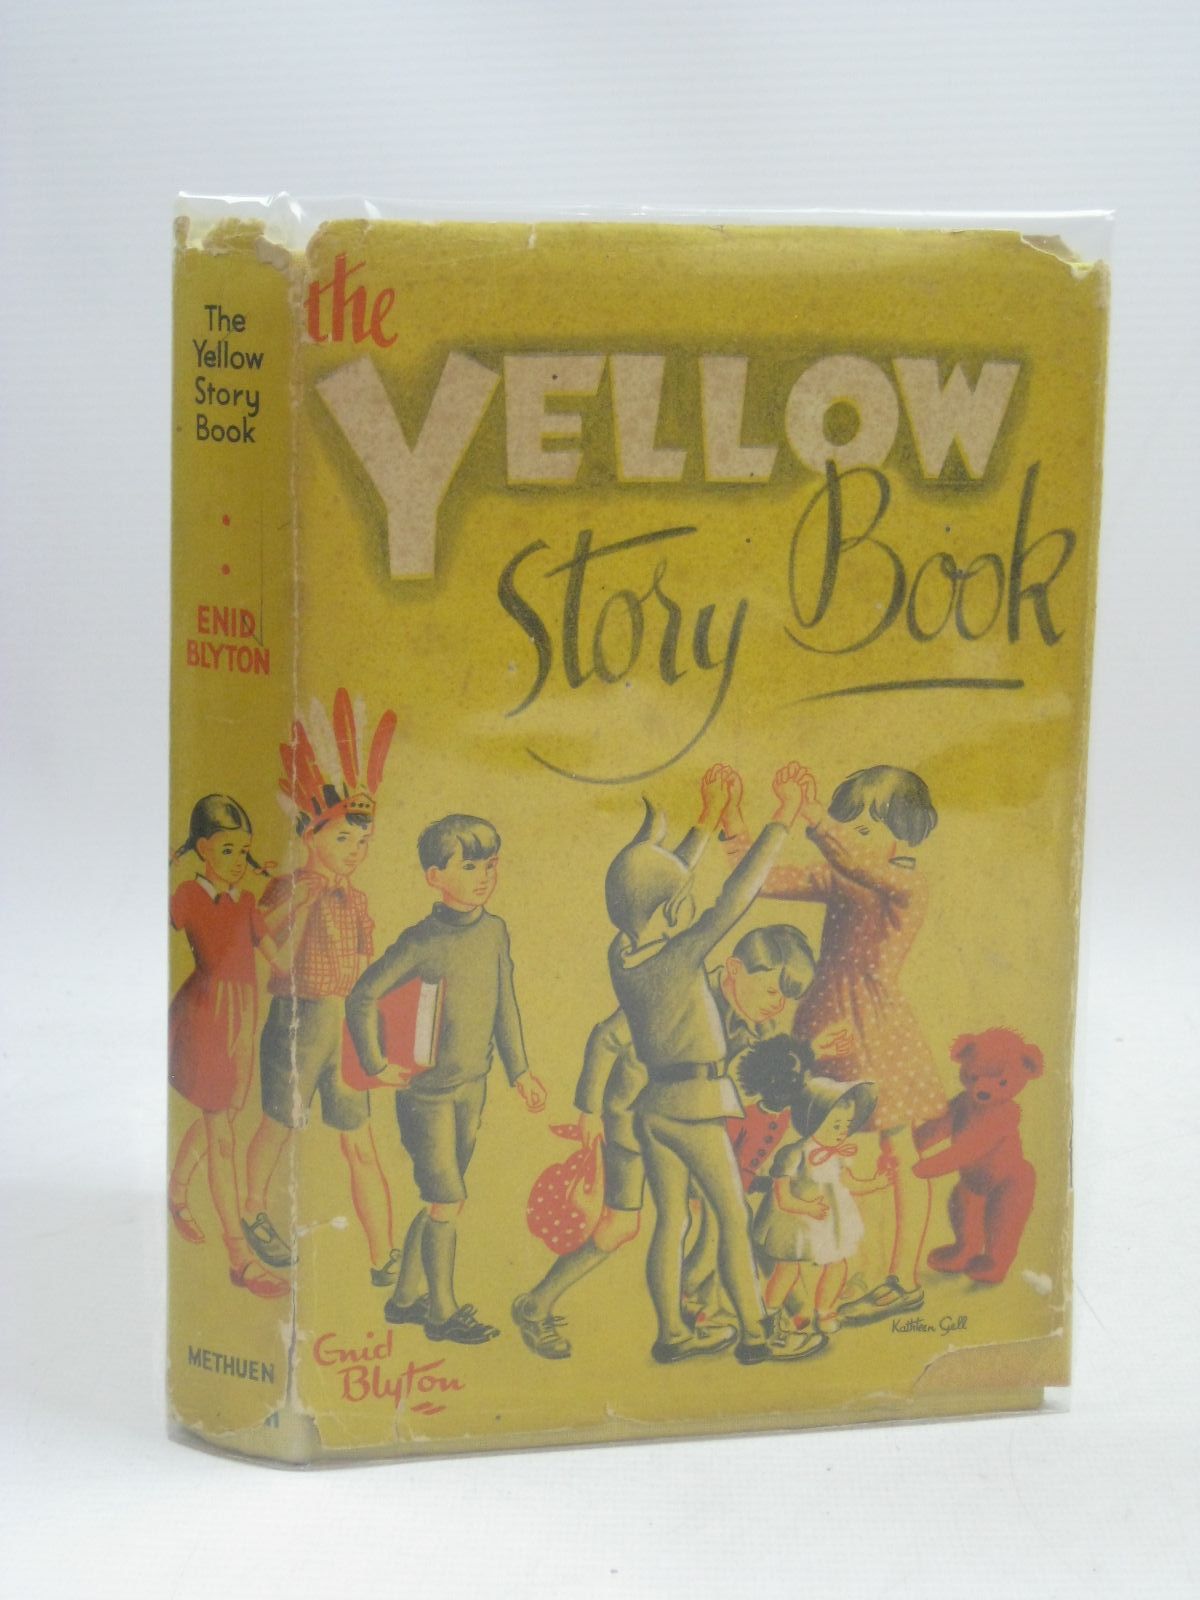 Cover of THE YELLOW STORY BOOK by Enid Blyton